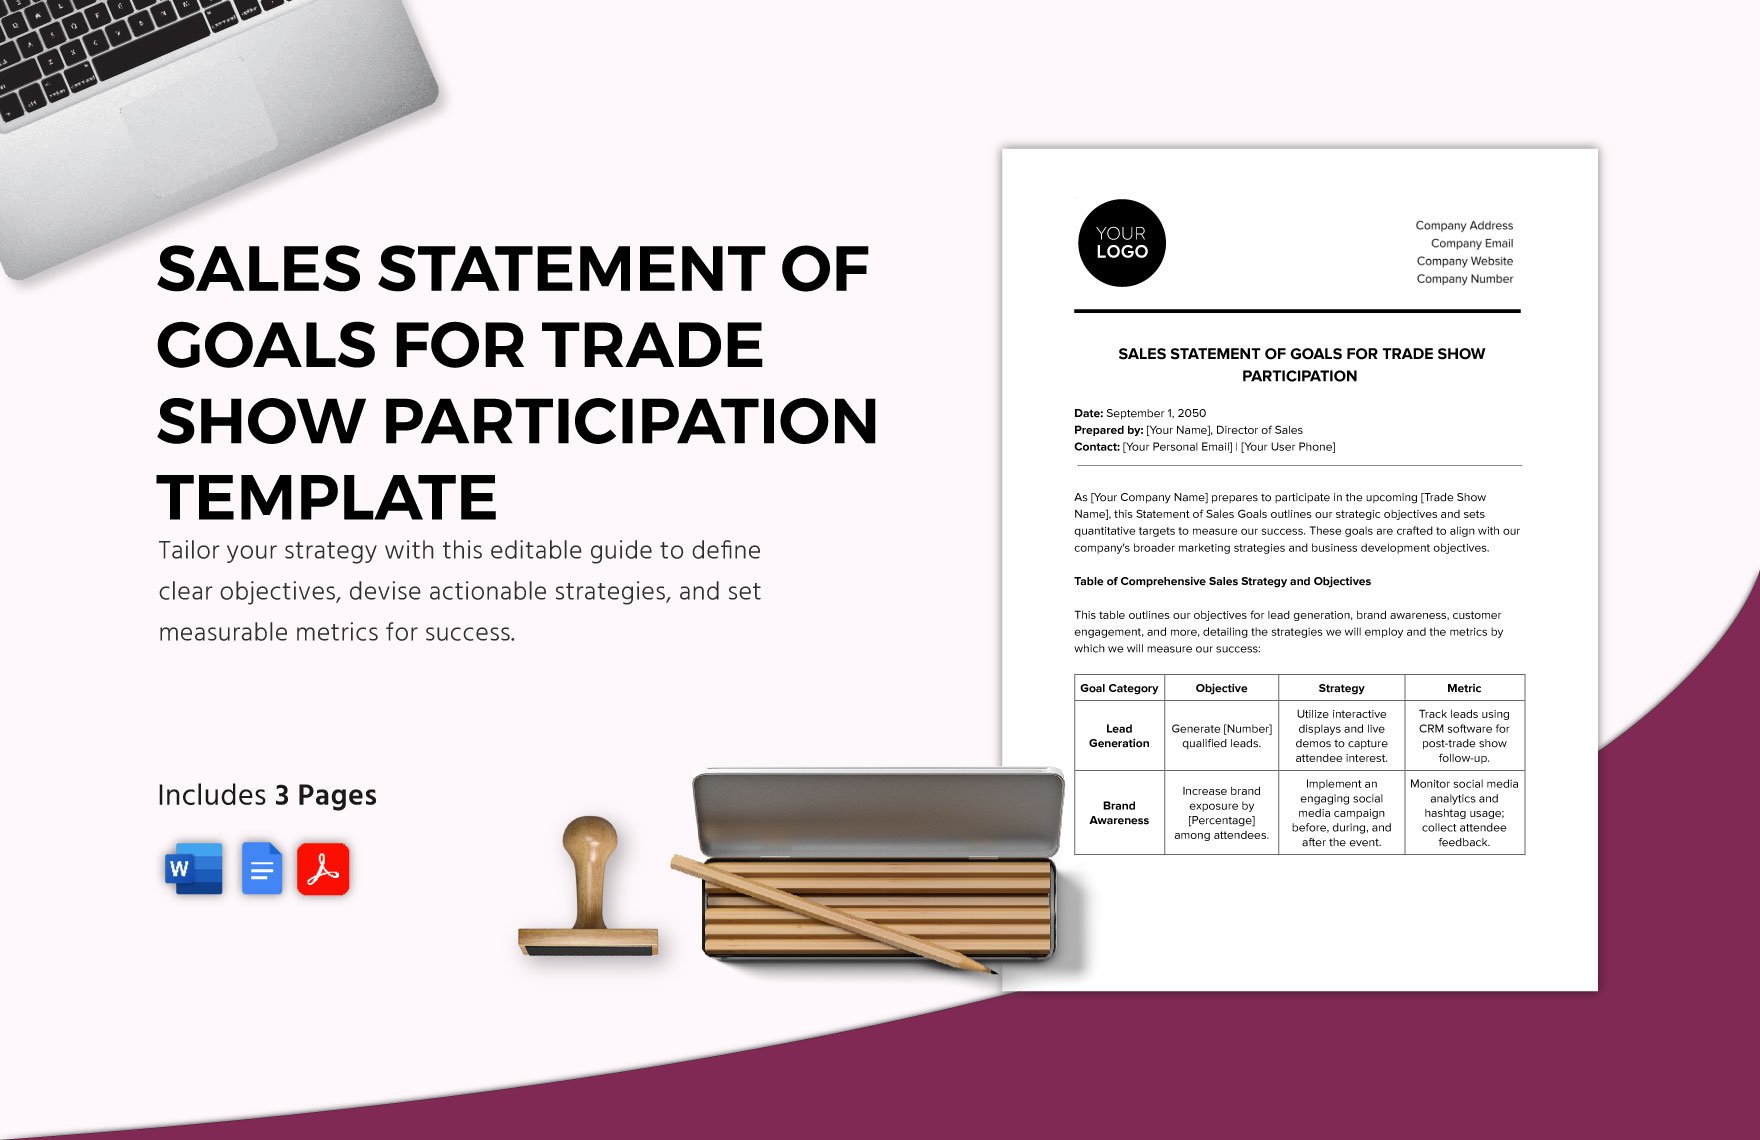 Sales Statement of Goals for Trade Show Participation Template